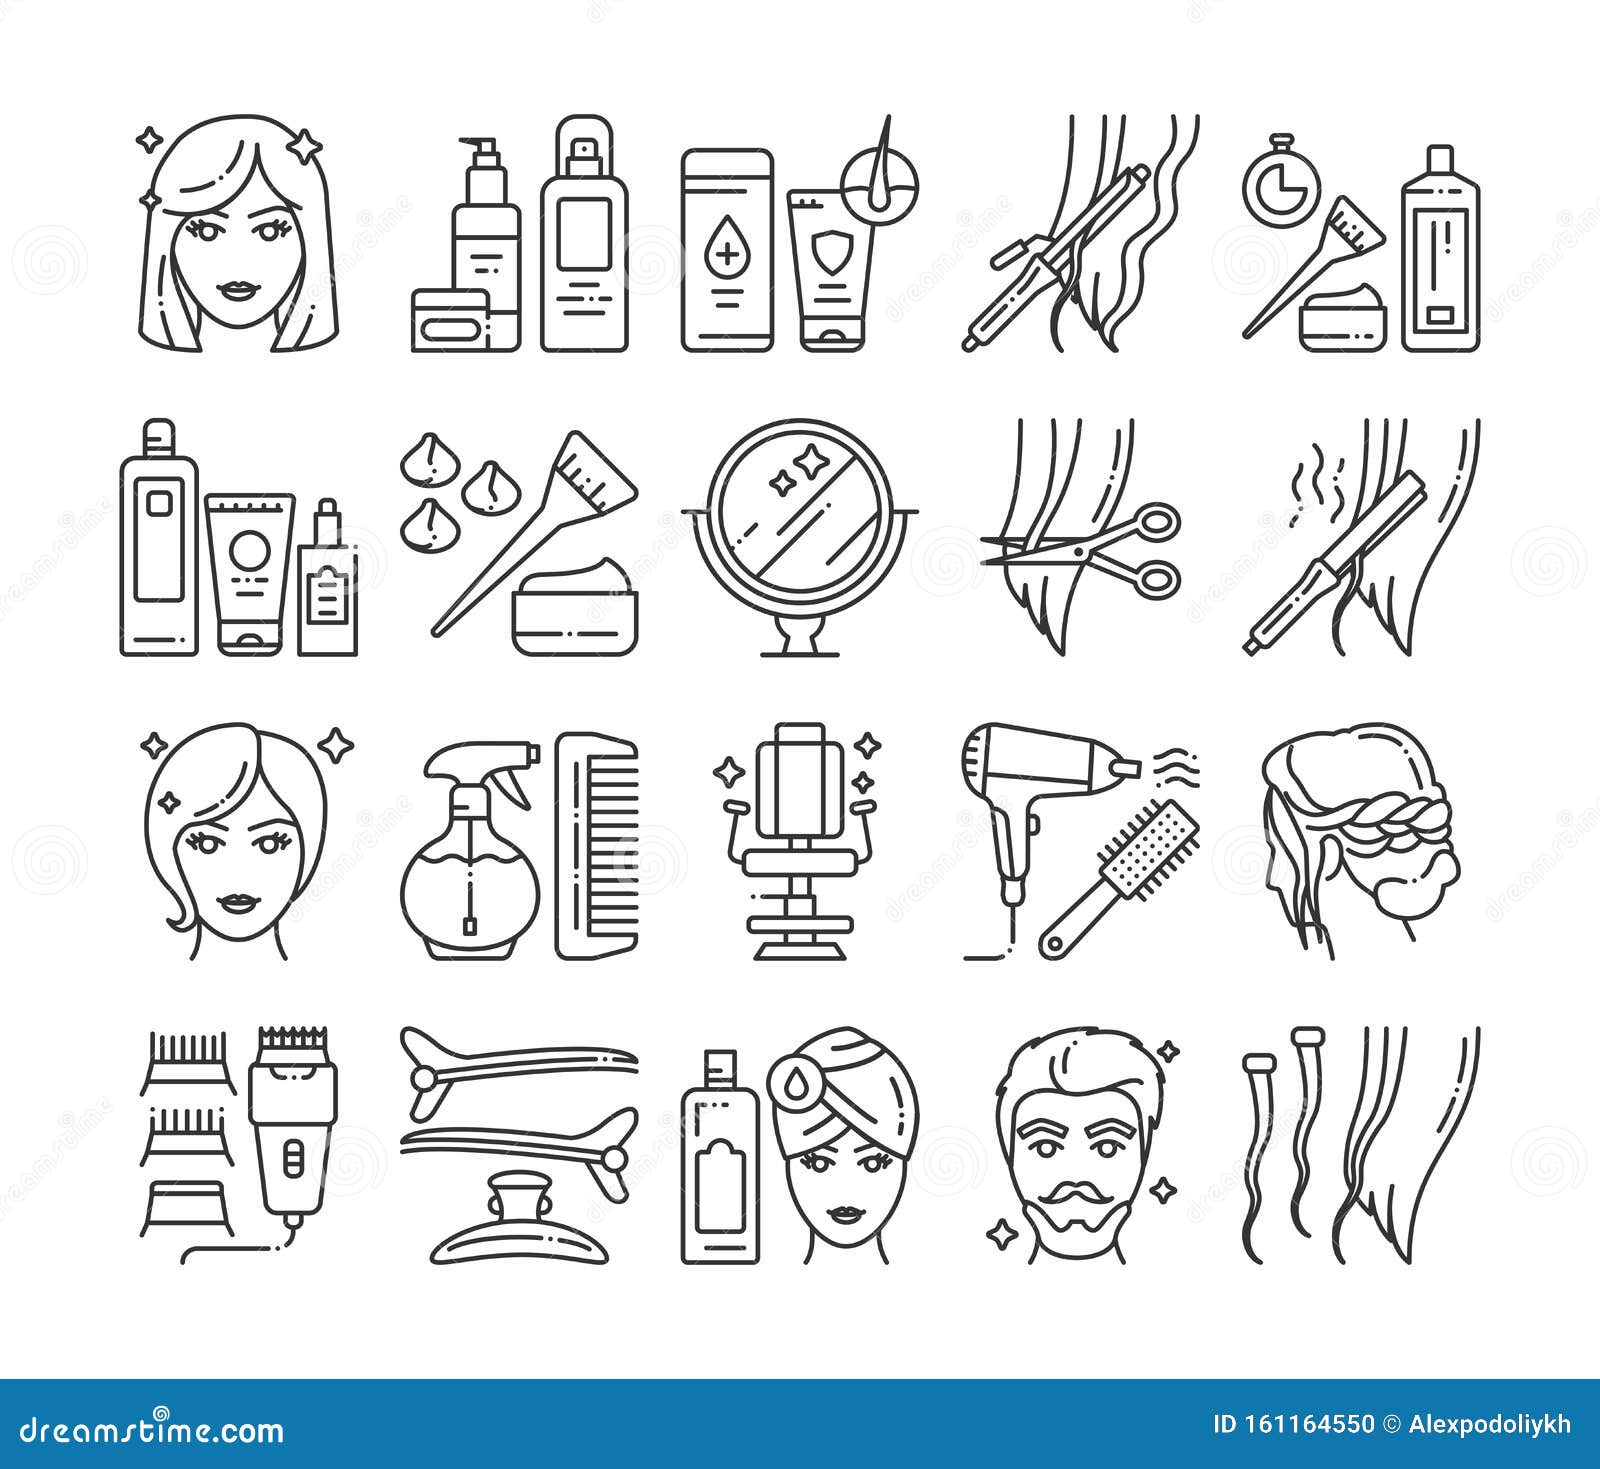 Hairdresser Service Line Icons Set Professional Hair Styling